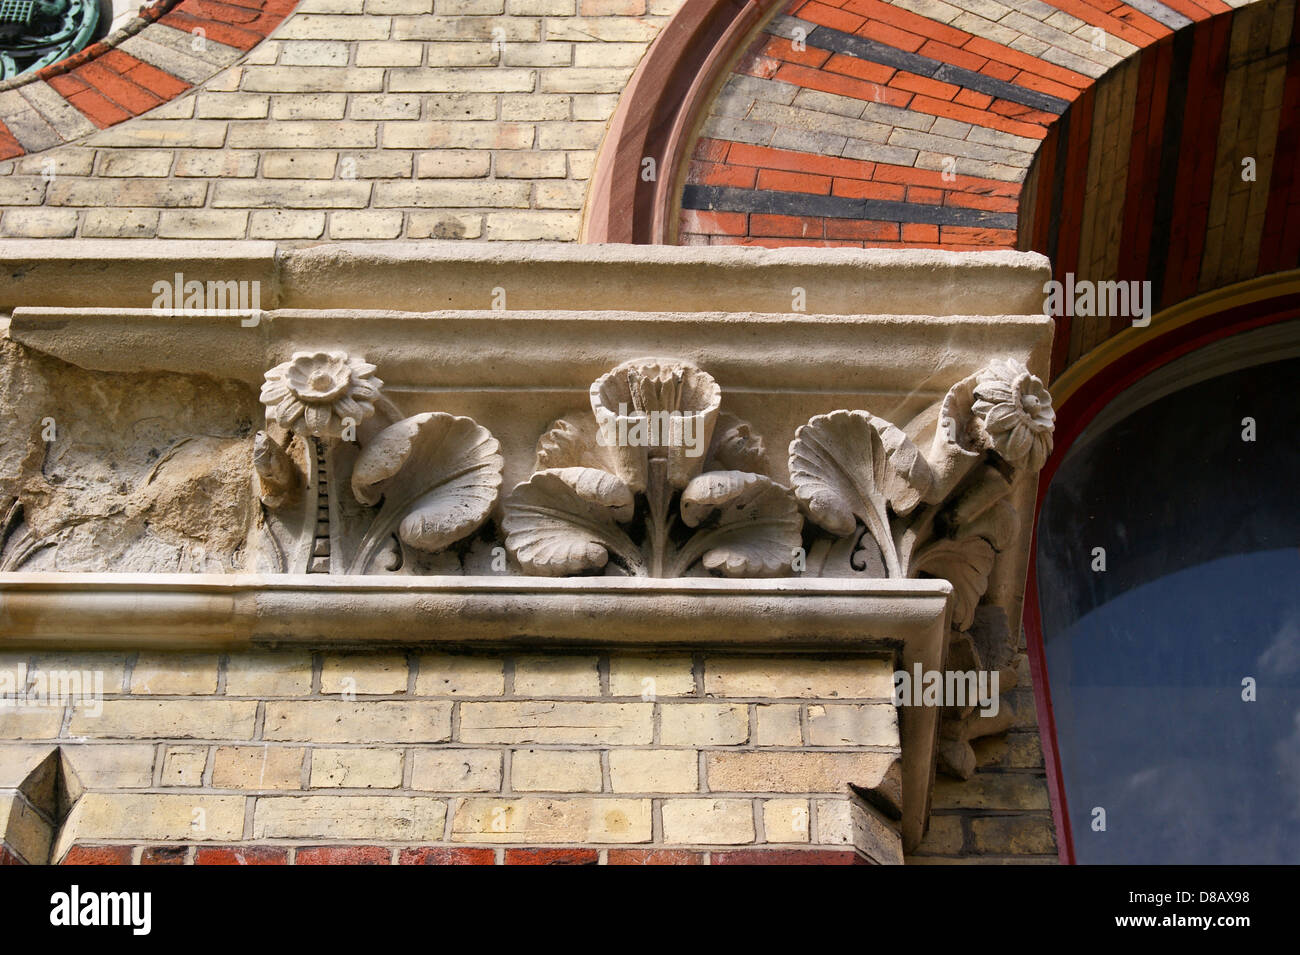 Architectural detail, Abbey Mills sewage pumping station 1868 by Joseph Bazalgette and Edmund Cooper, Stratford, London, England Stock Photo